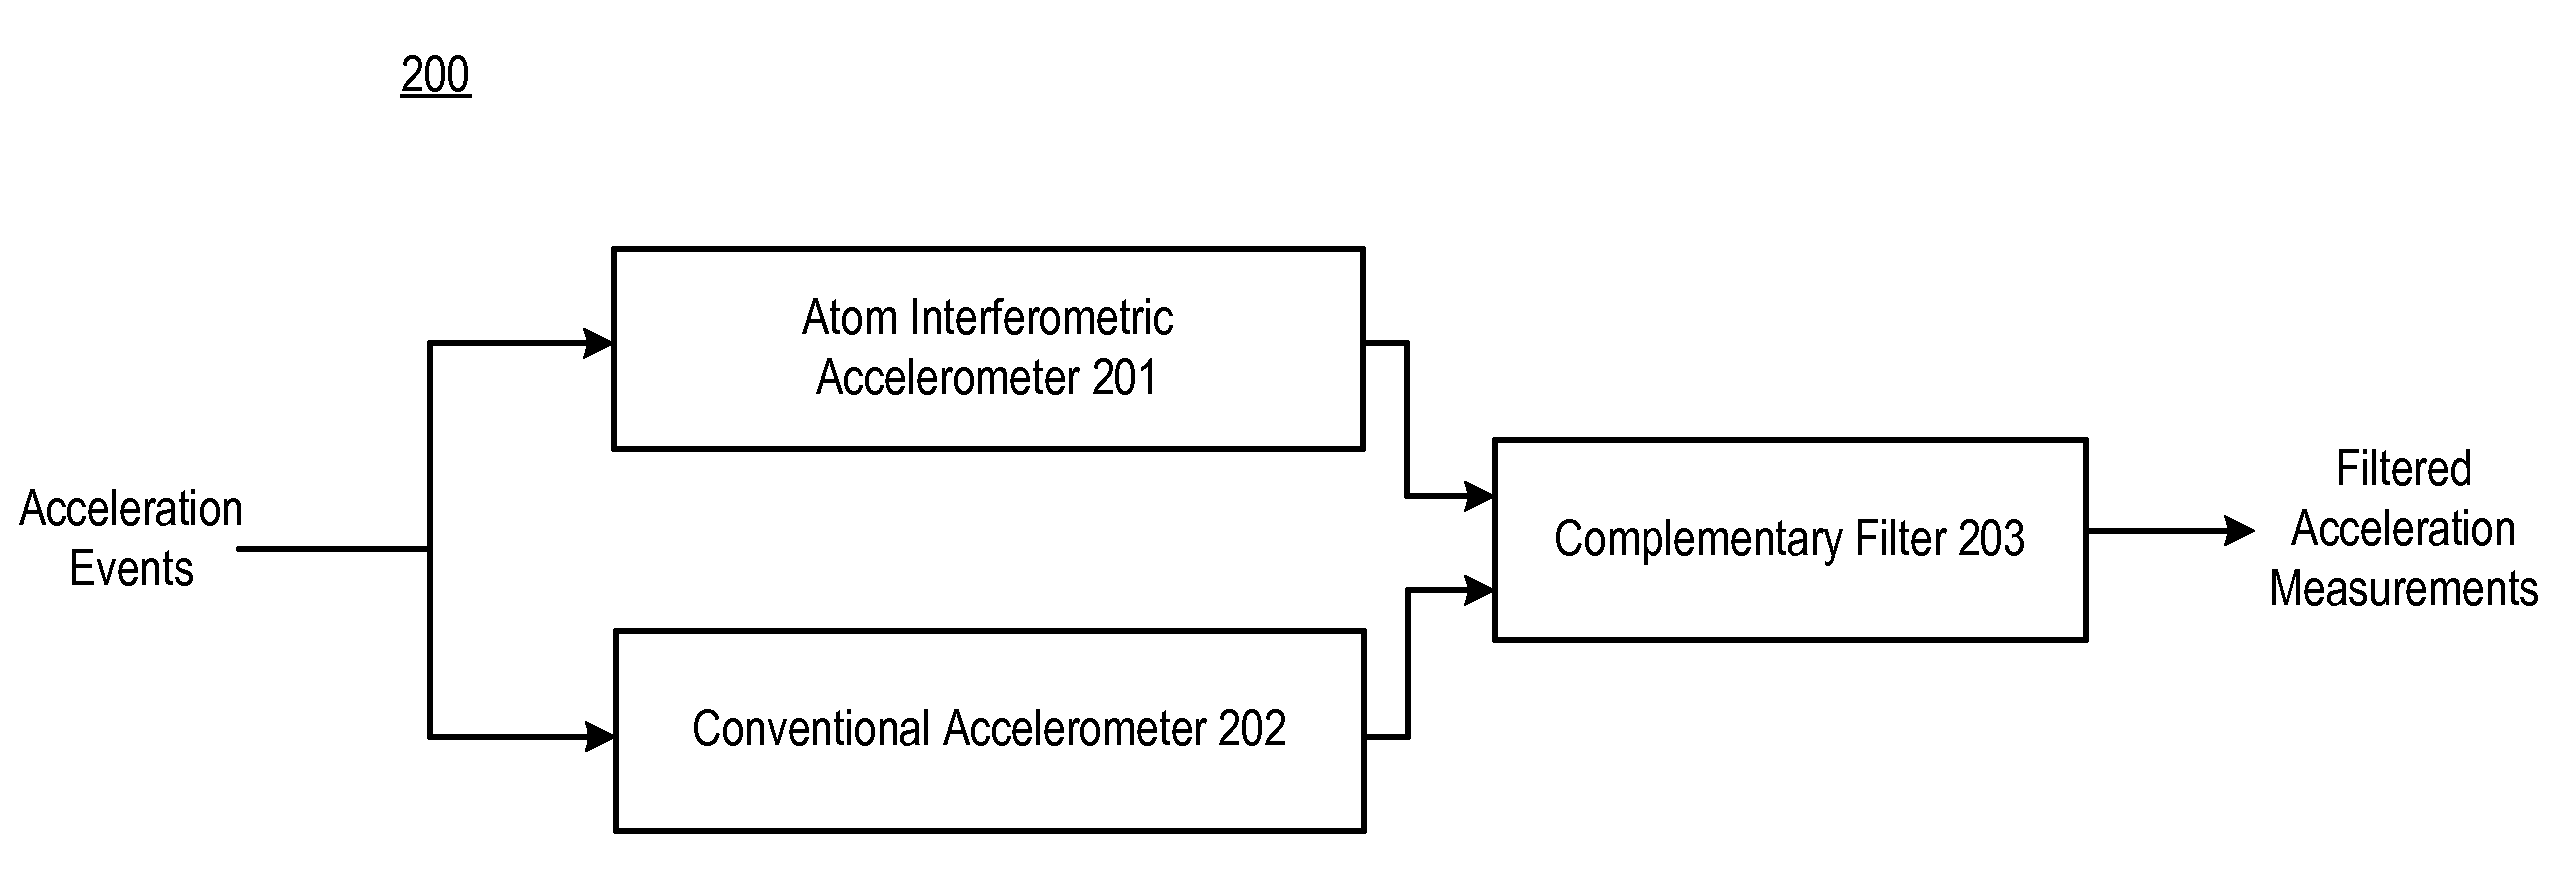 Performance of an atom interferometric device through complementary filtering